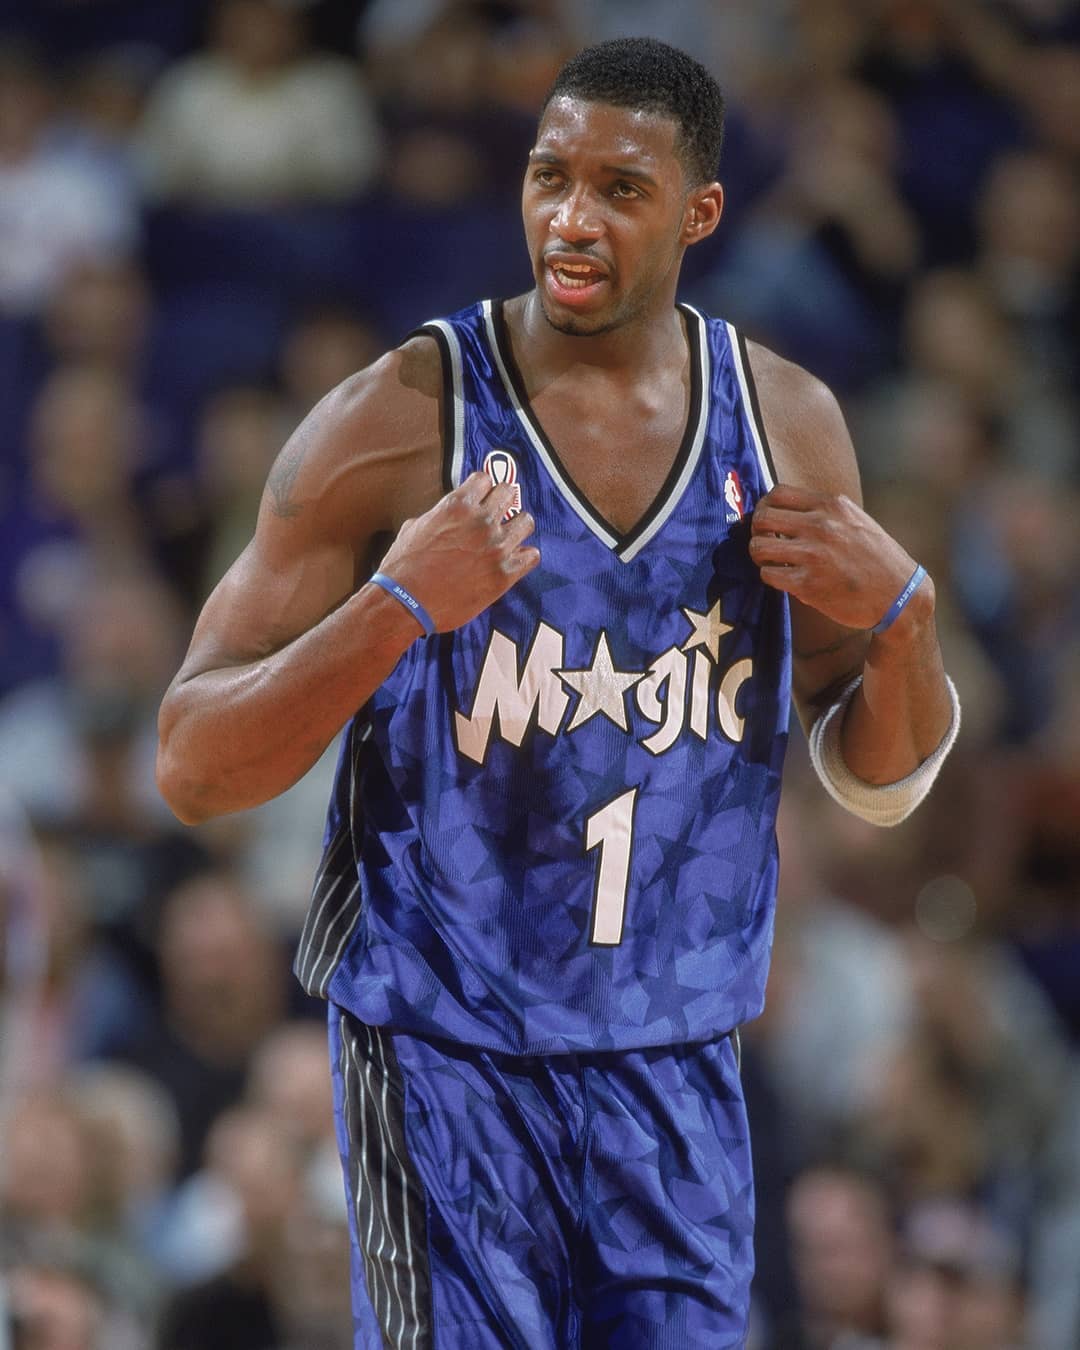 SLAM - The old Magic jerseys with the stars were very